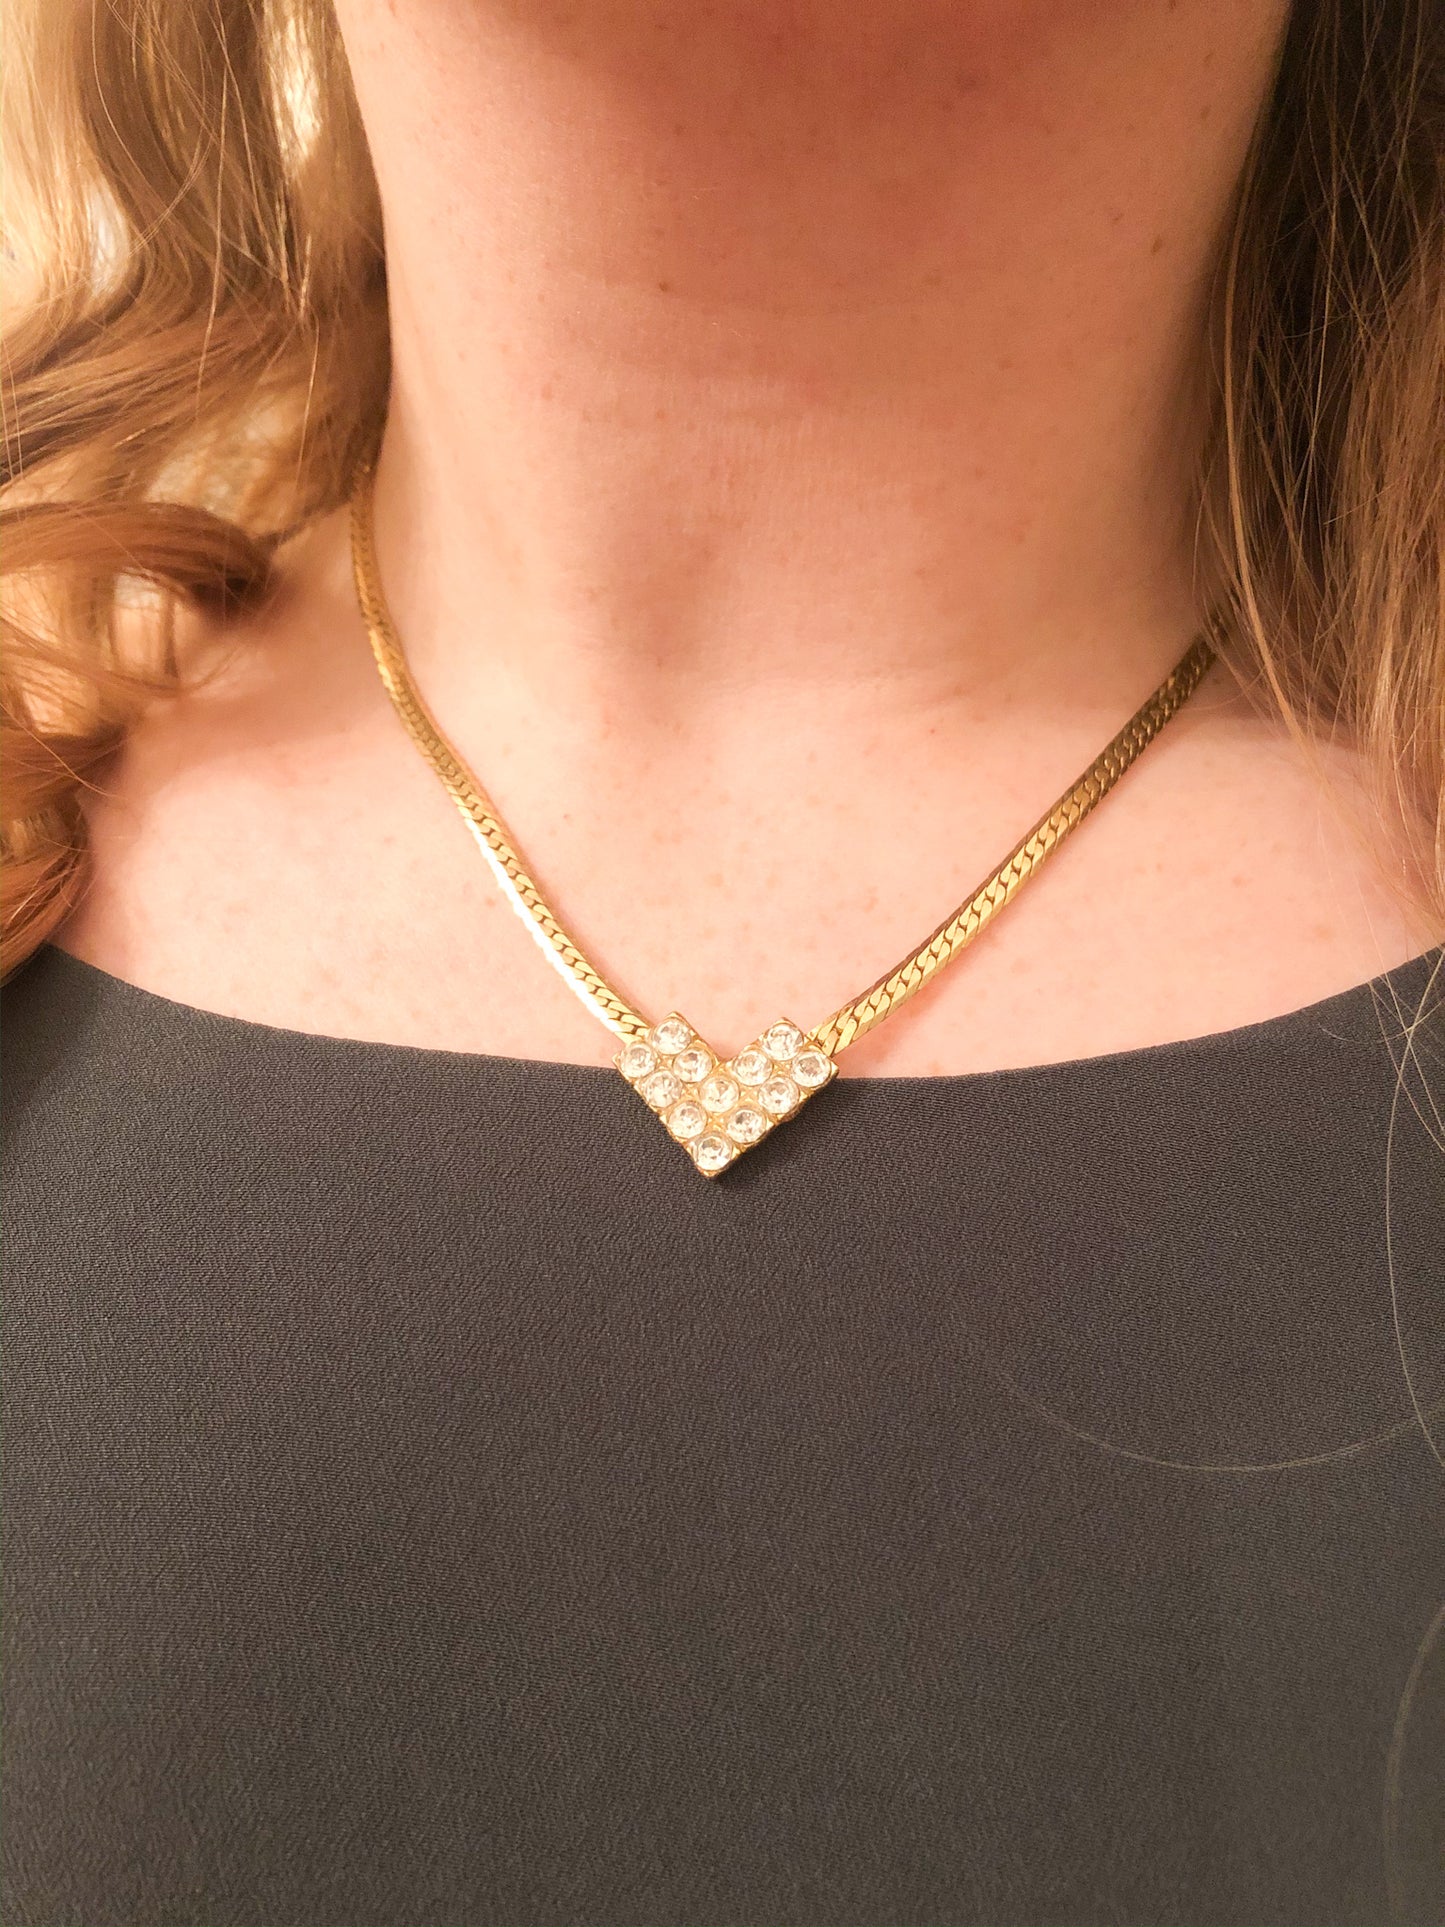 Gold Chain with Diamond Heart Necklace - Le Prix Fashion & Consulting